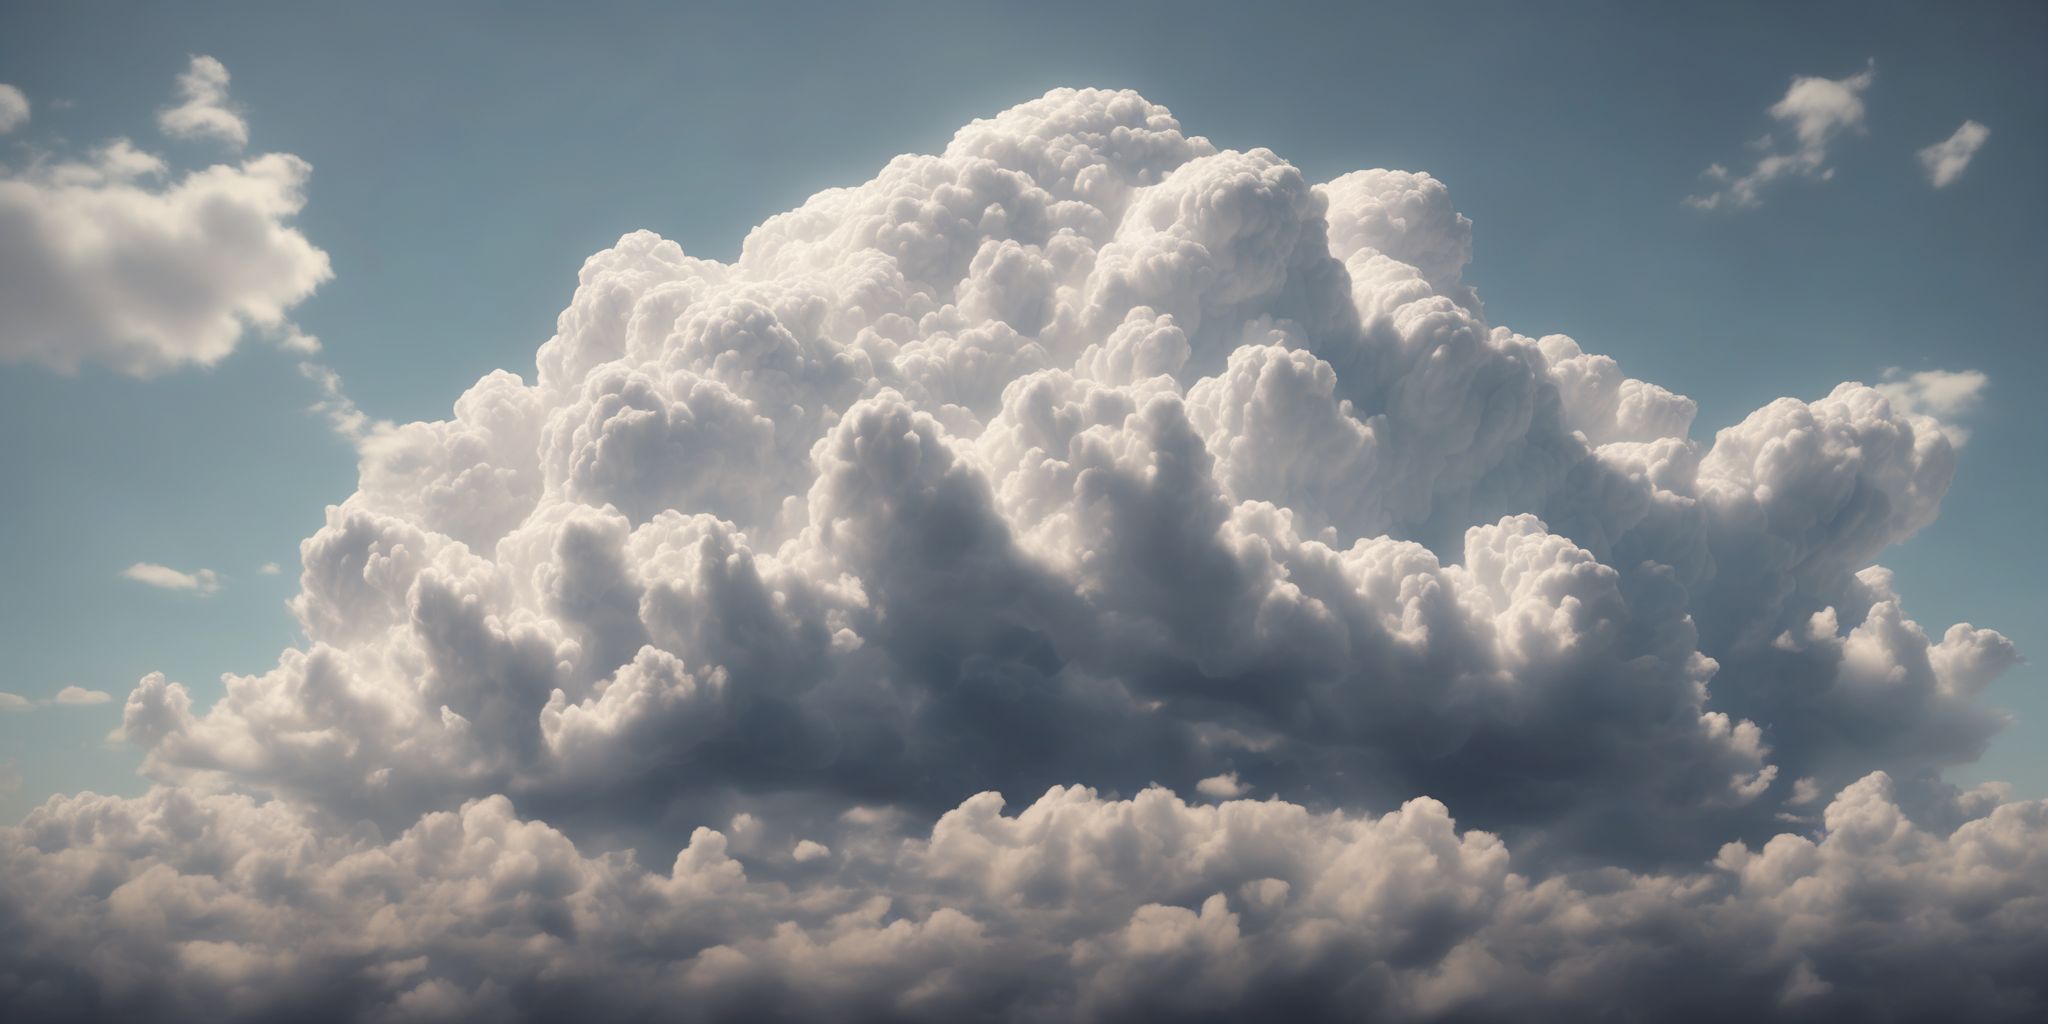 Cloud  in realistic, photographic style